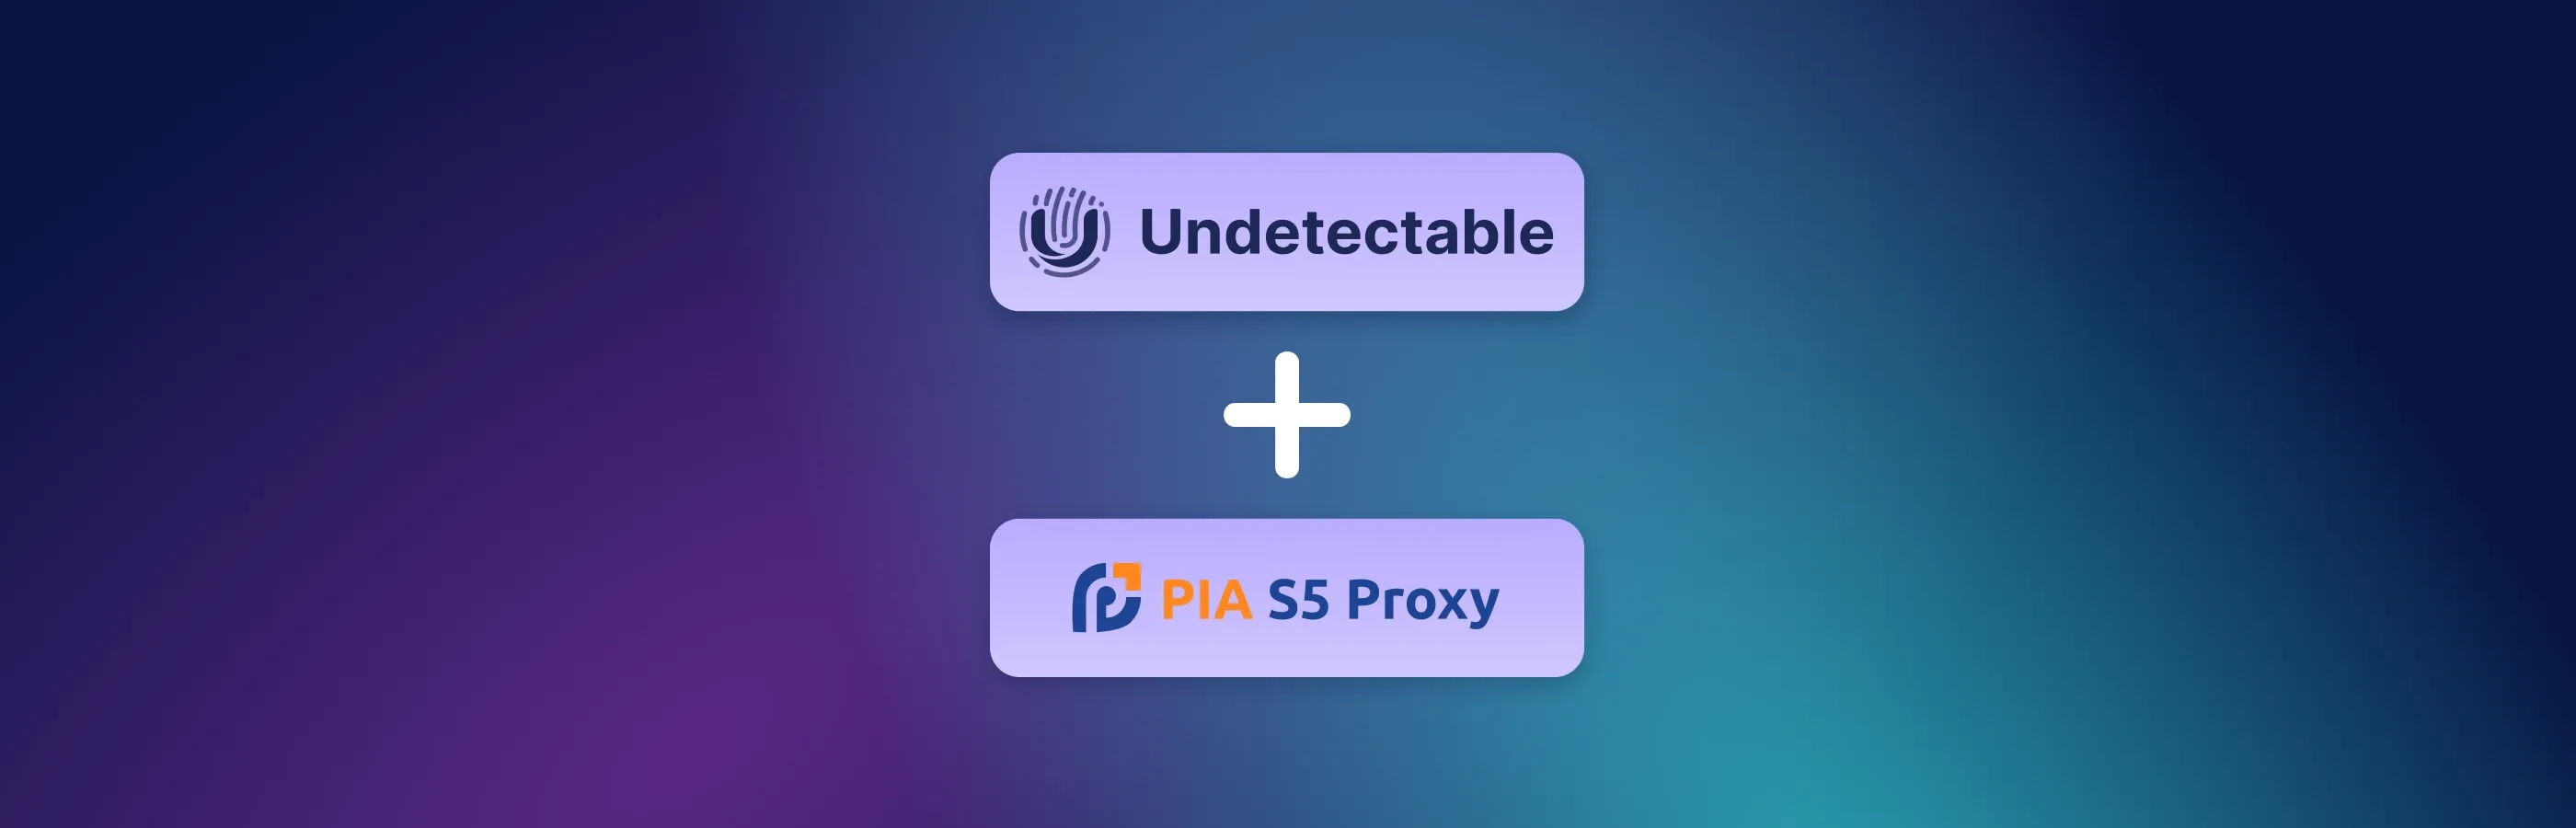 Connecting PIA S5 Proxy to the Undetectable Browser: steps and instructions